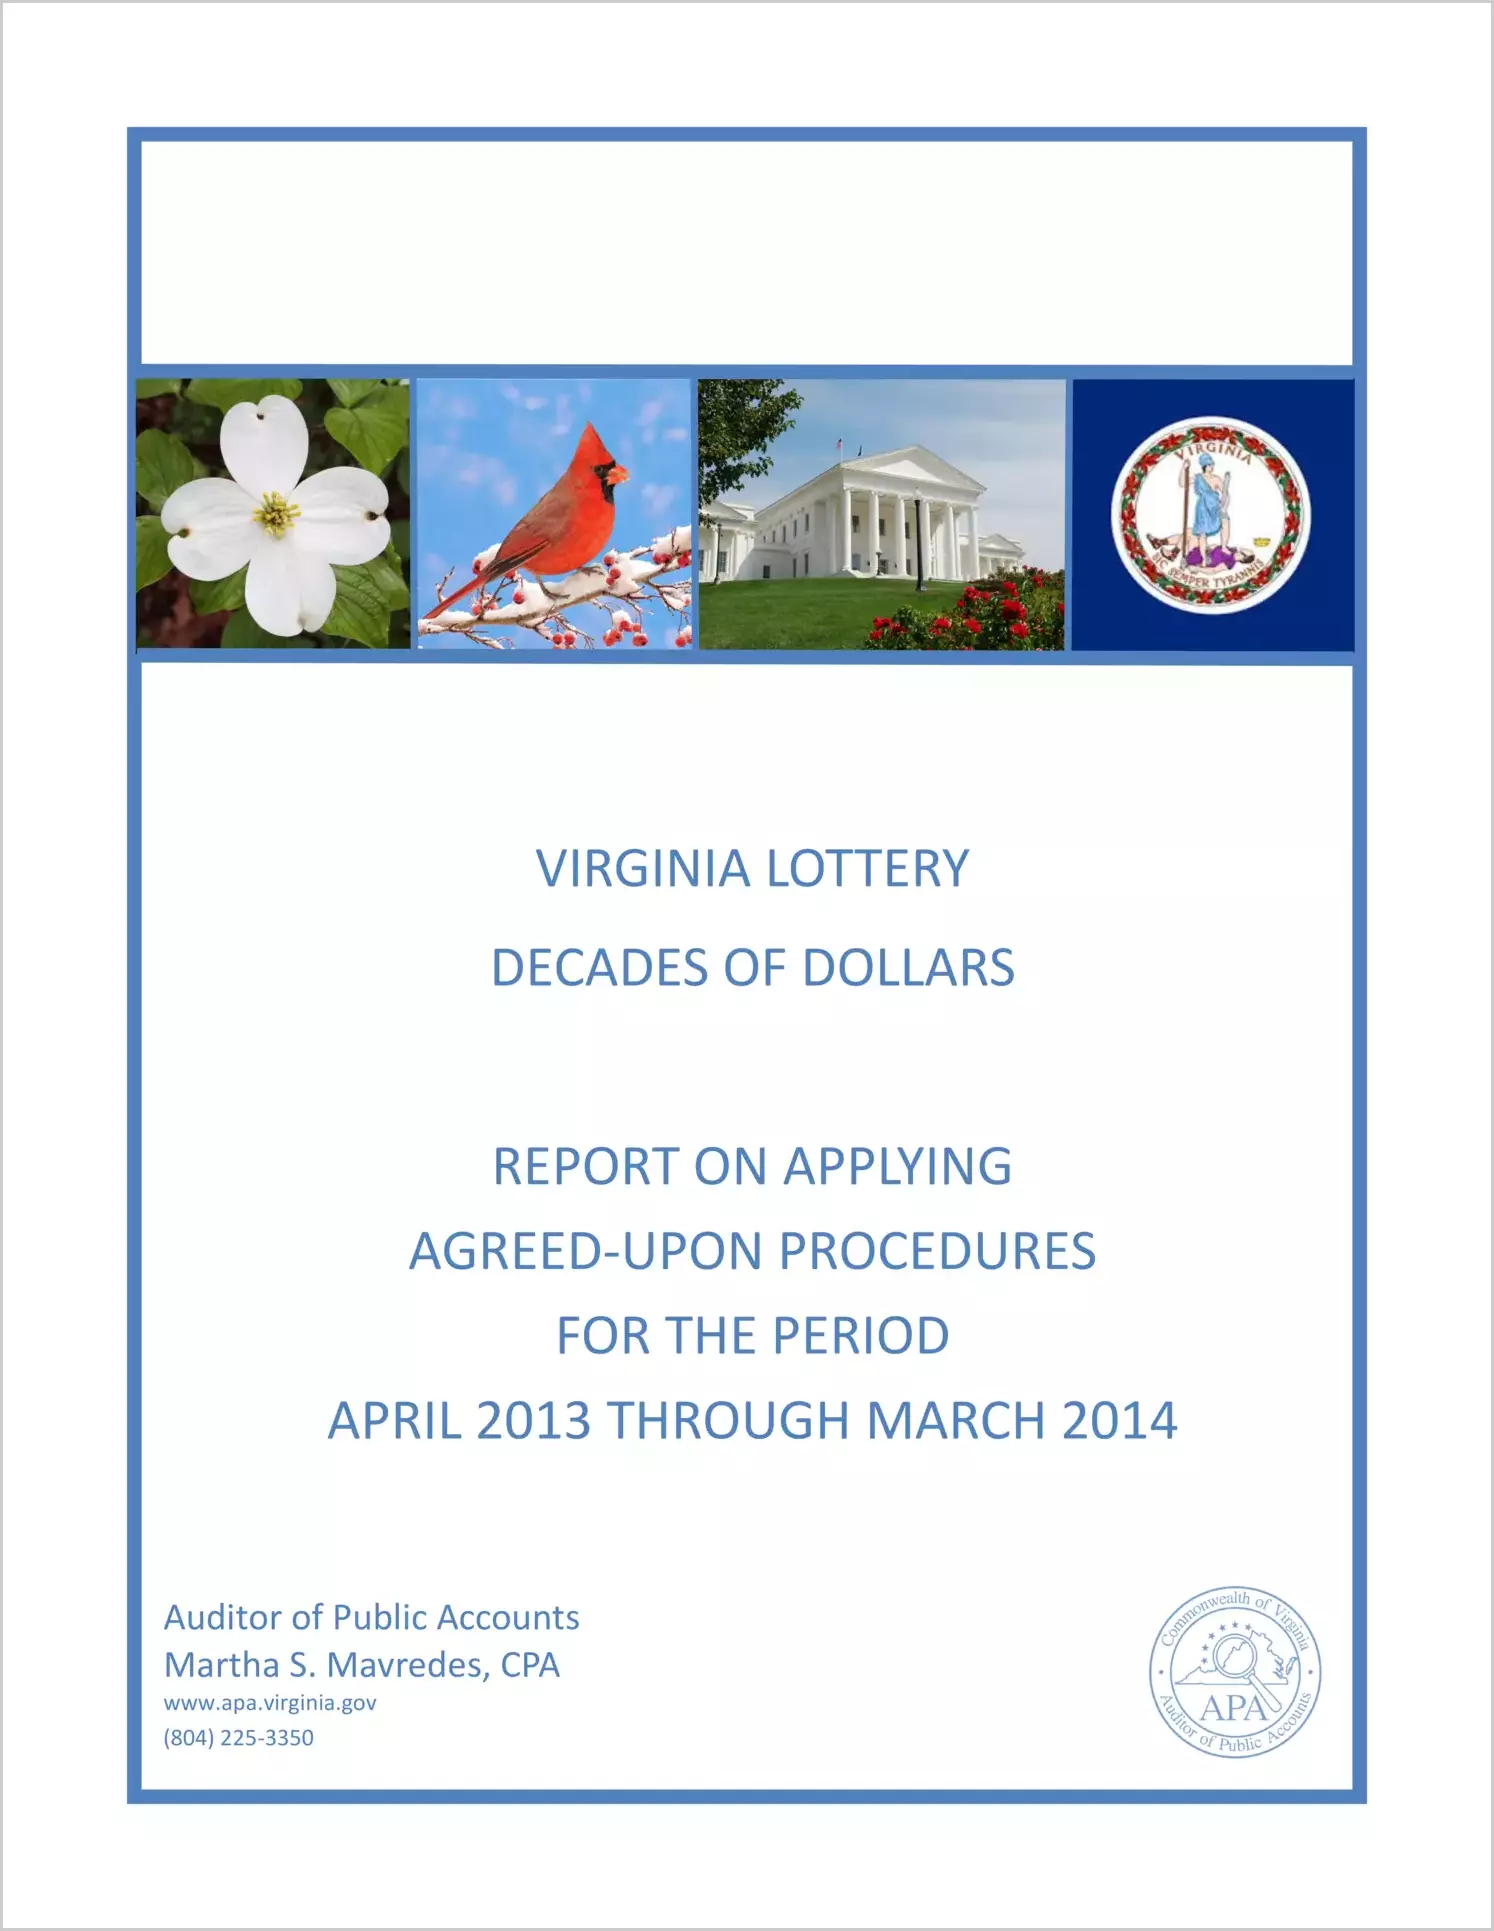 VA Lottery Decades of Dollars report on Applying Agreed-Upon Procedures for the period April, 2013 through March, 2014